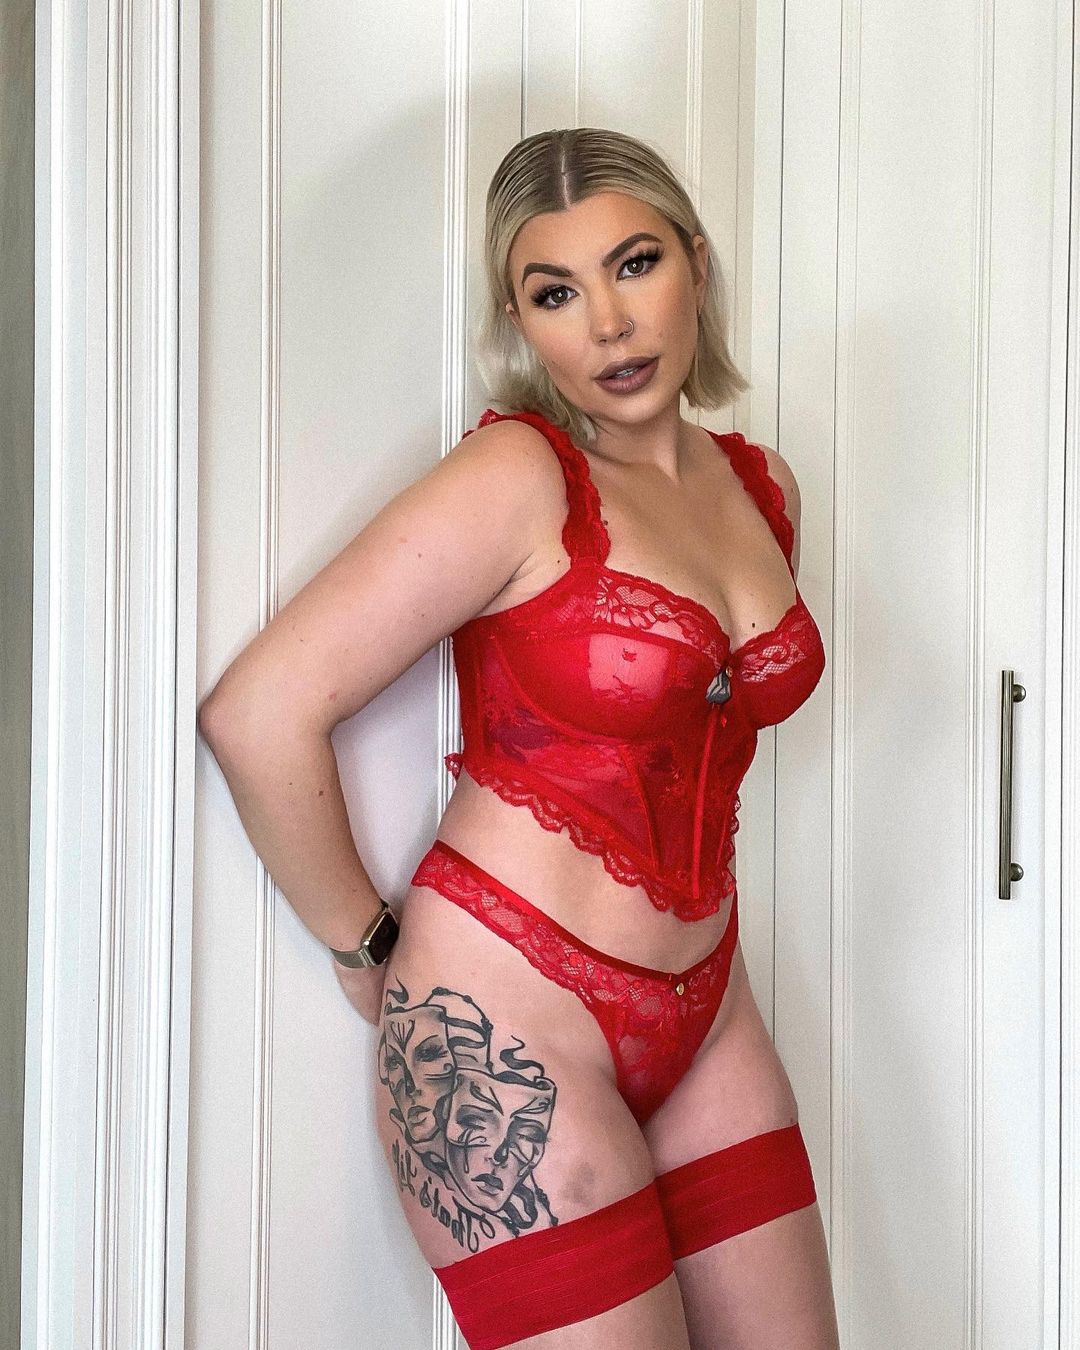 Olivia Bowen looks incredible as she poses in red lace lingerie for Valentine’s Day